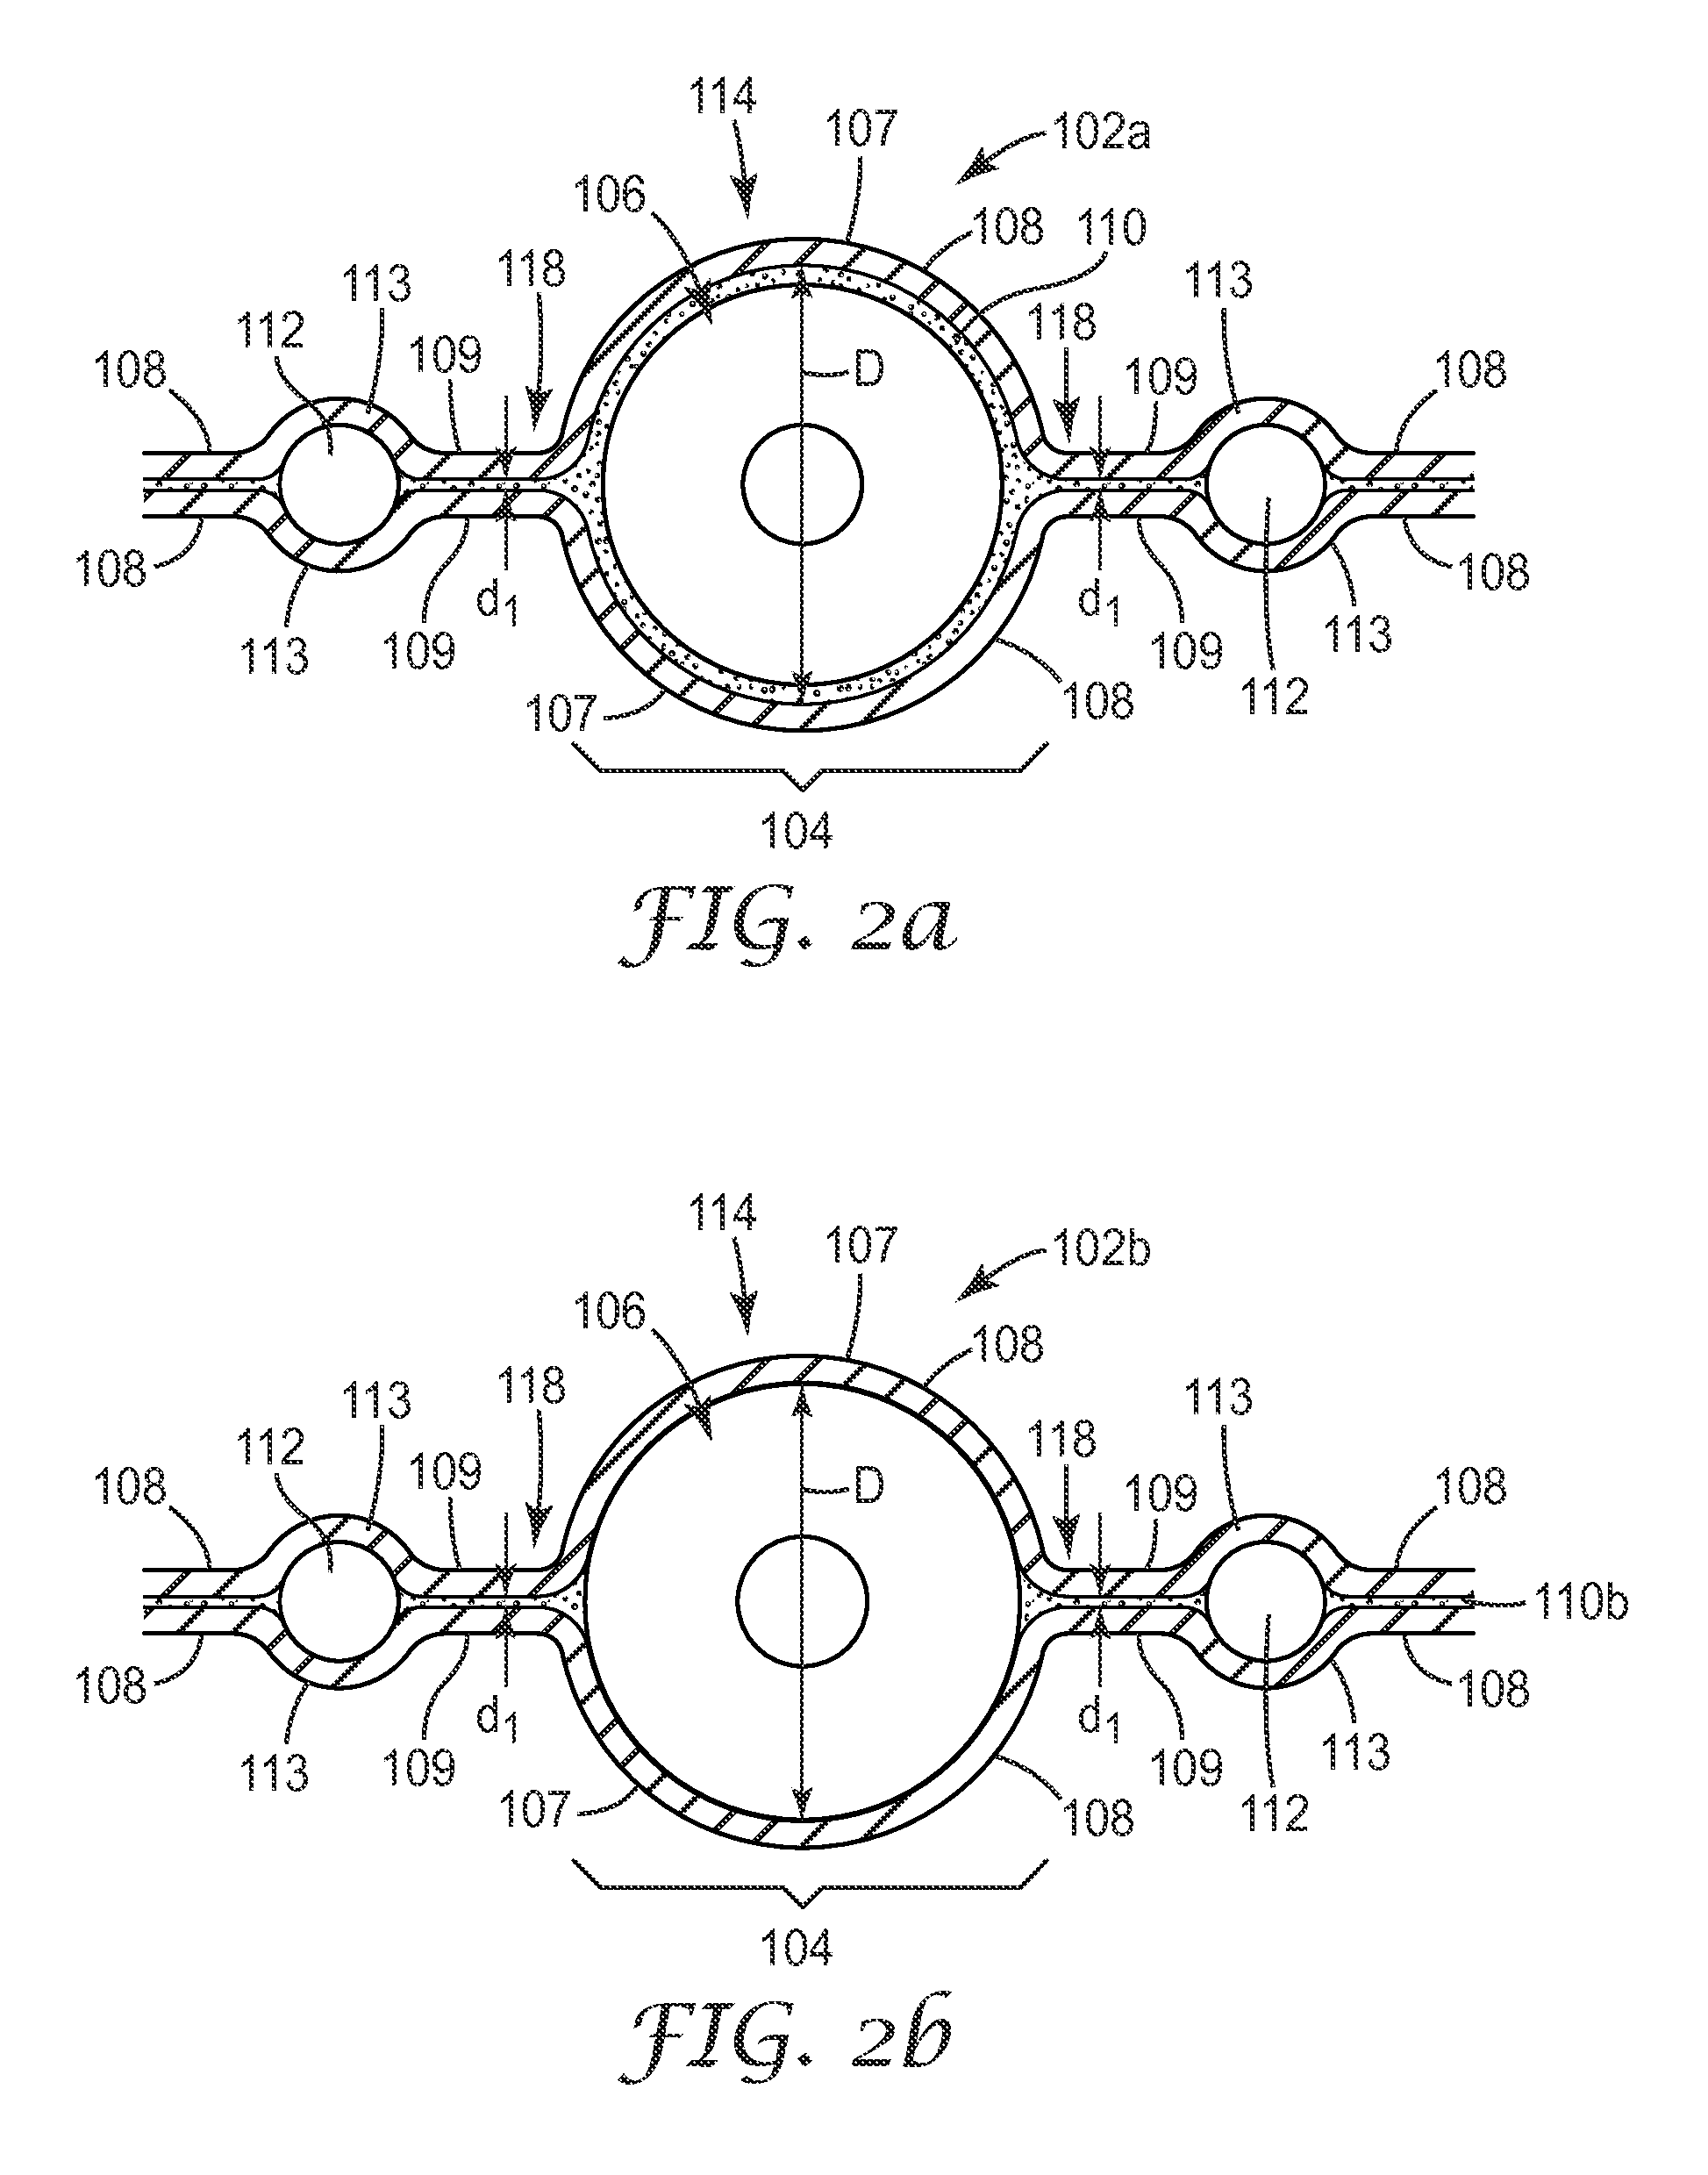 High density shielded electrical cable and other shielded cables, systems, and methods